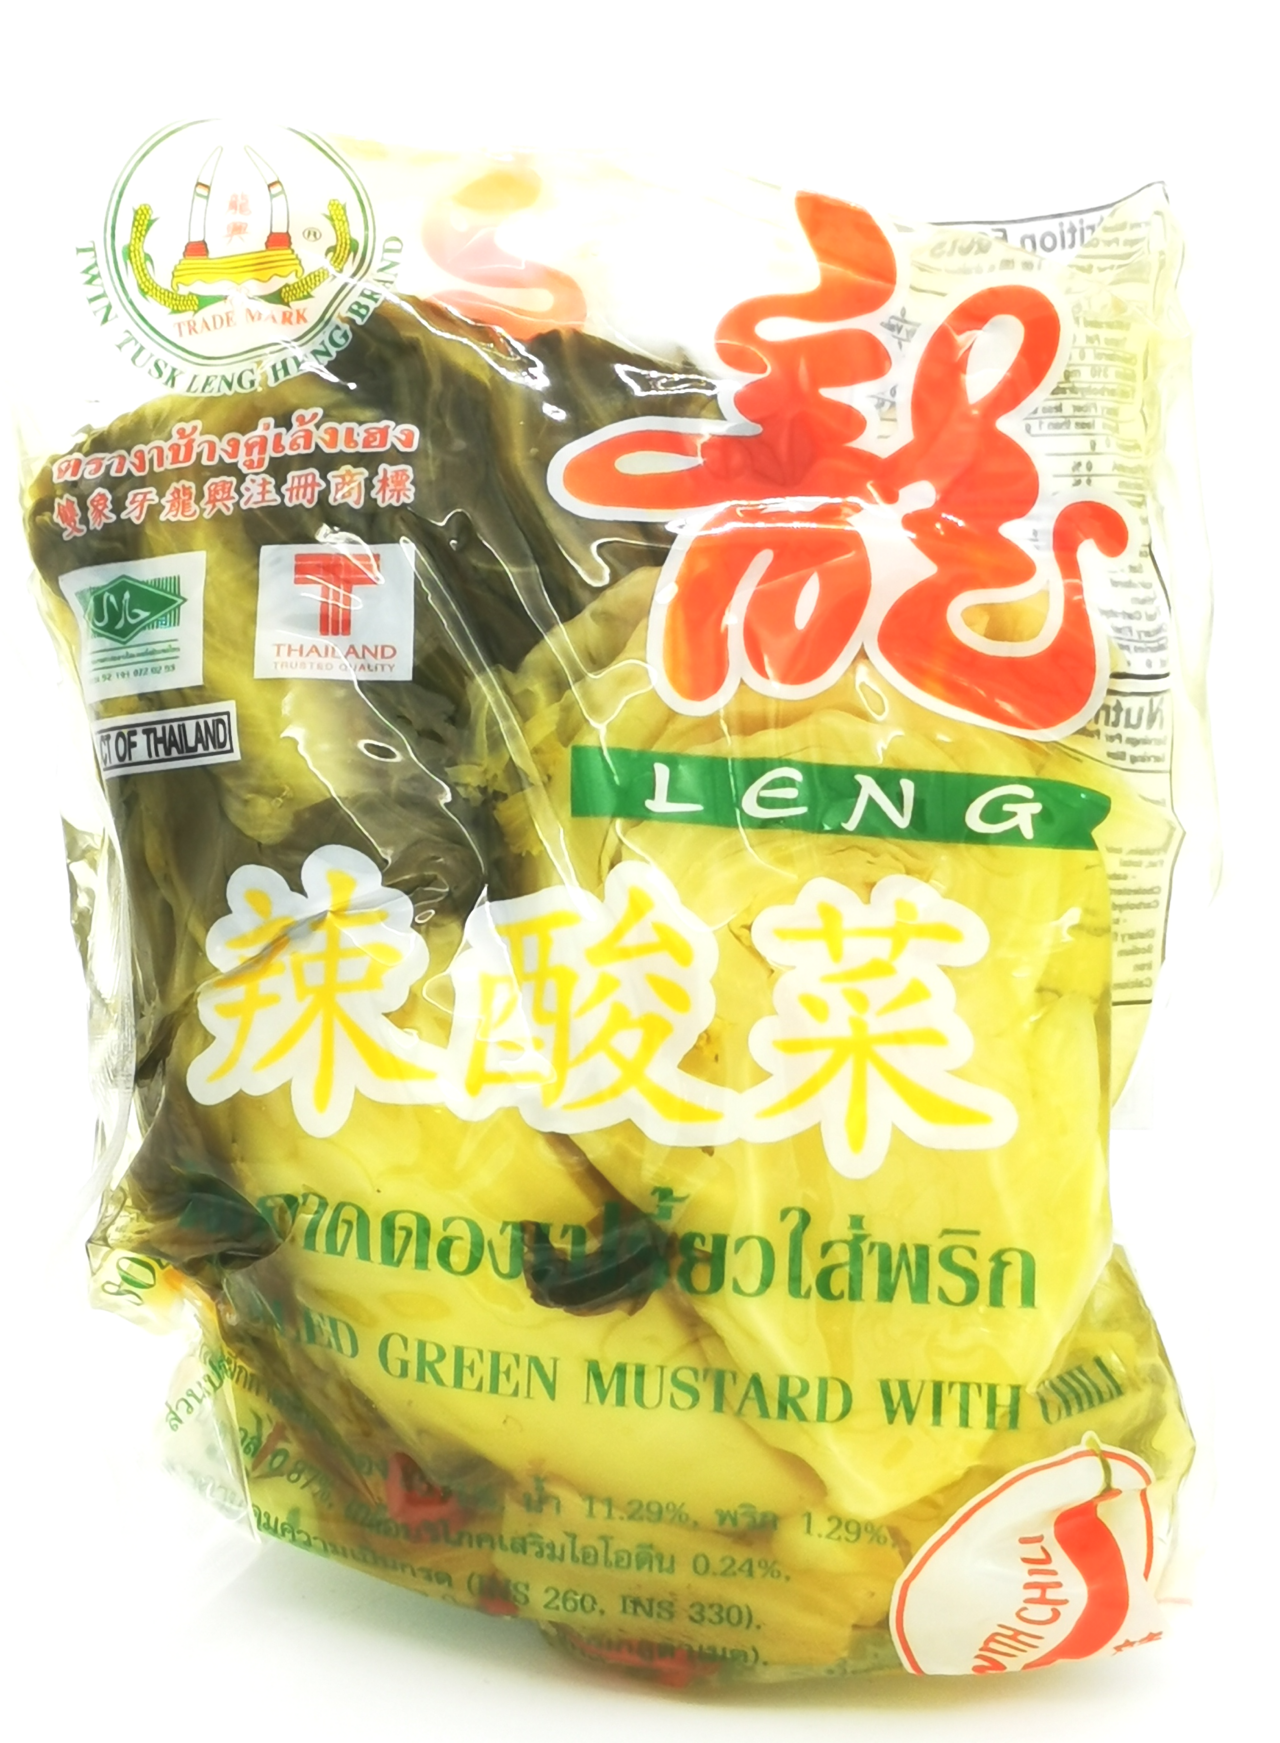 Sour Pickled Green Mustard with chili 350g